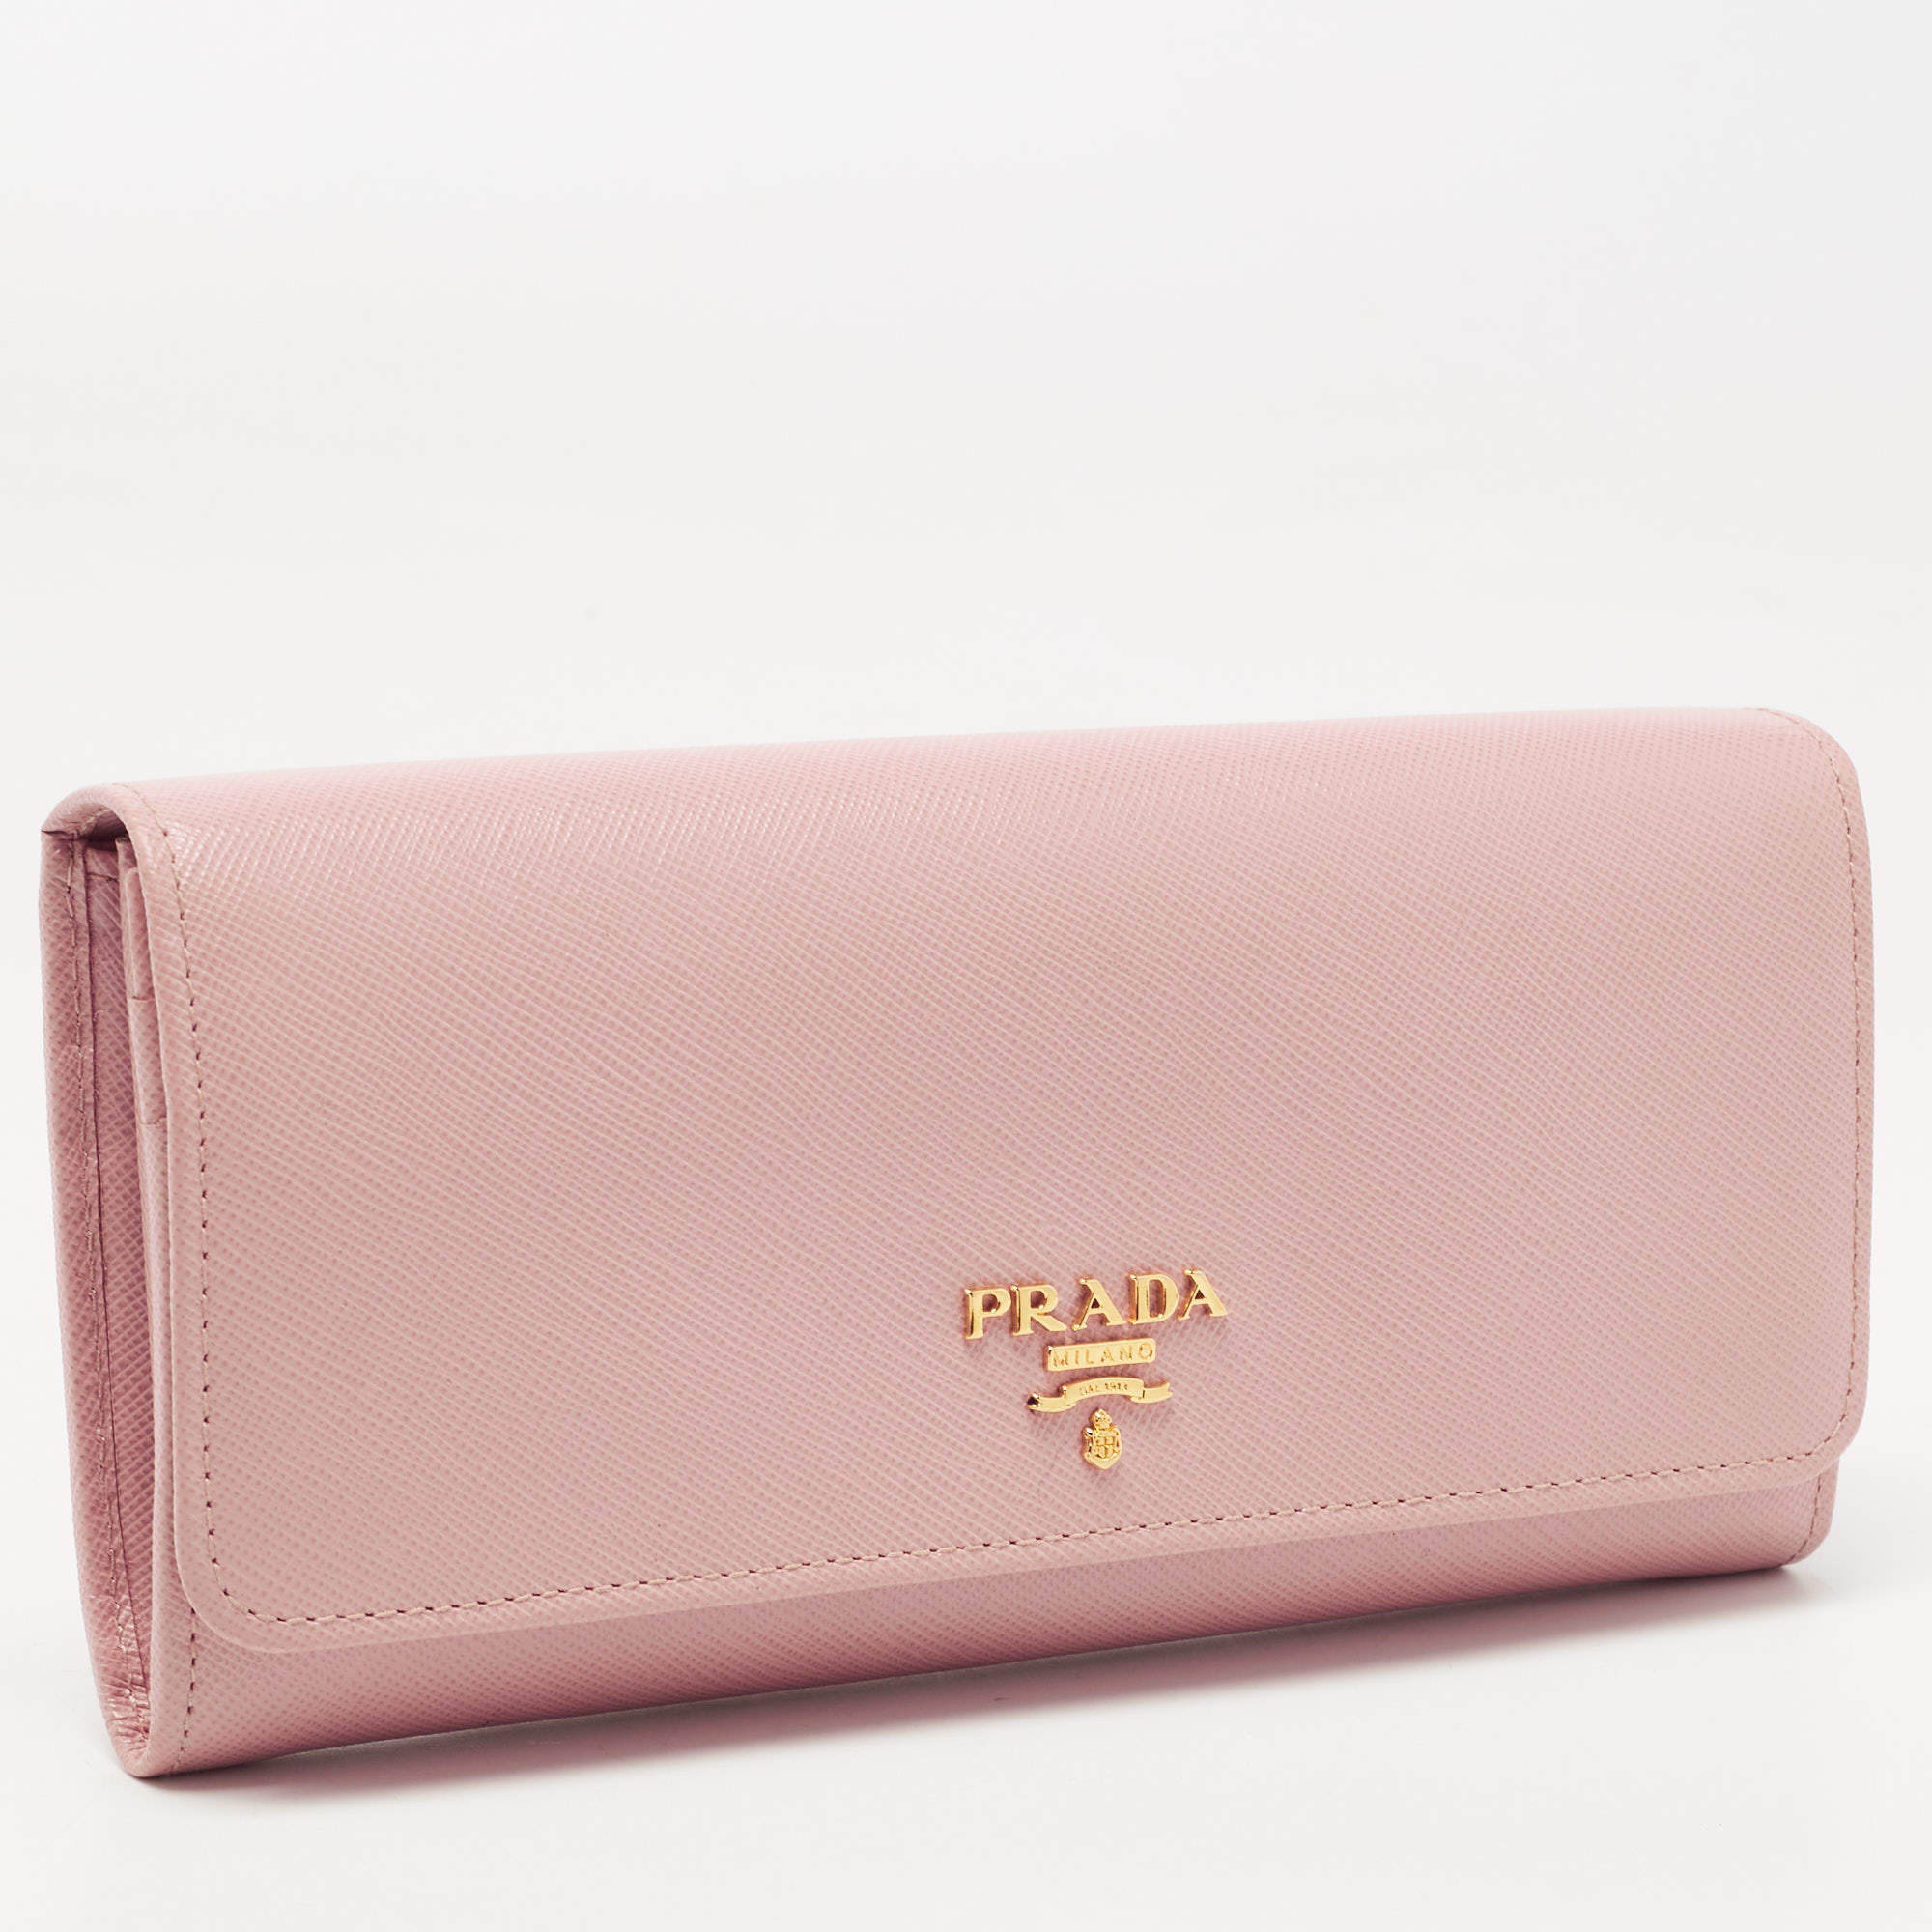 PRADA Continental Flap Saffiano Leather Long Wallet Pink